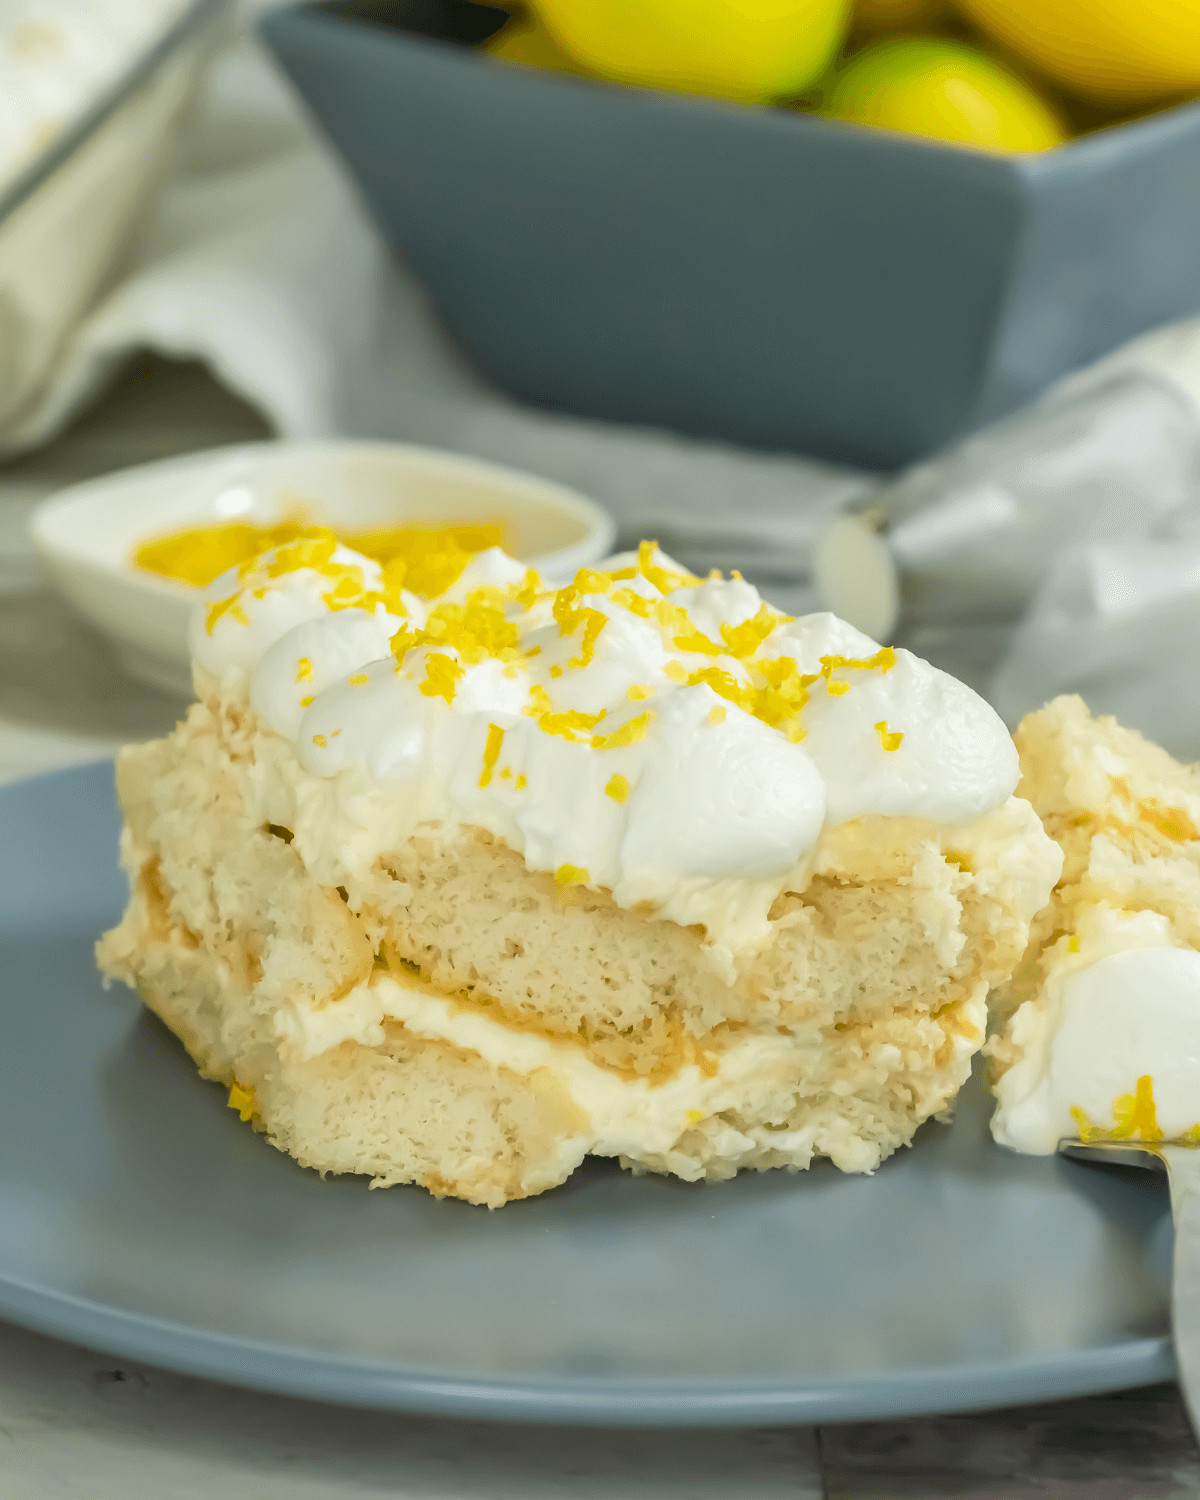 A slice of Limoncello Tiramisu with cream topping and lemon zest on a plate.